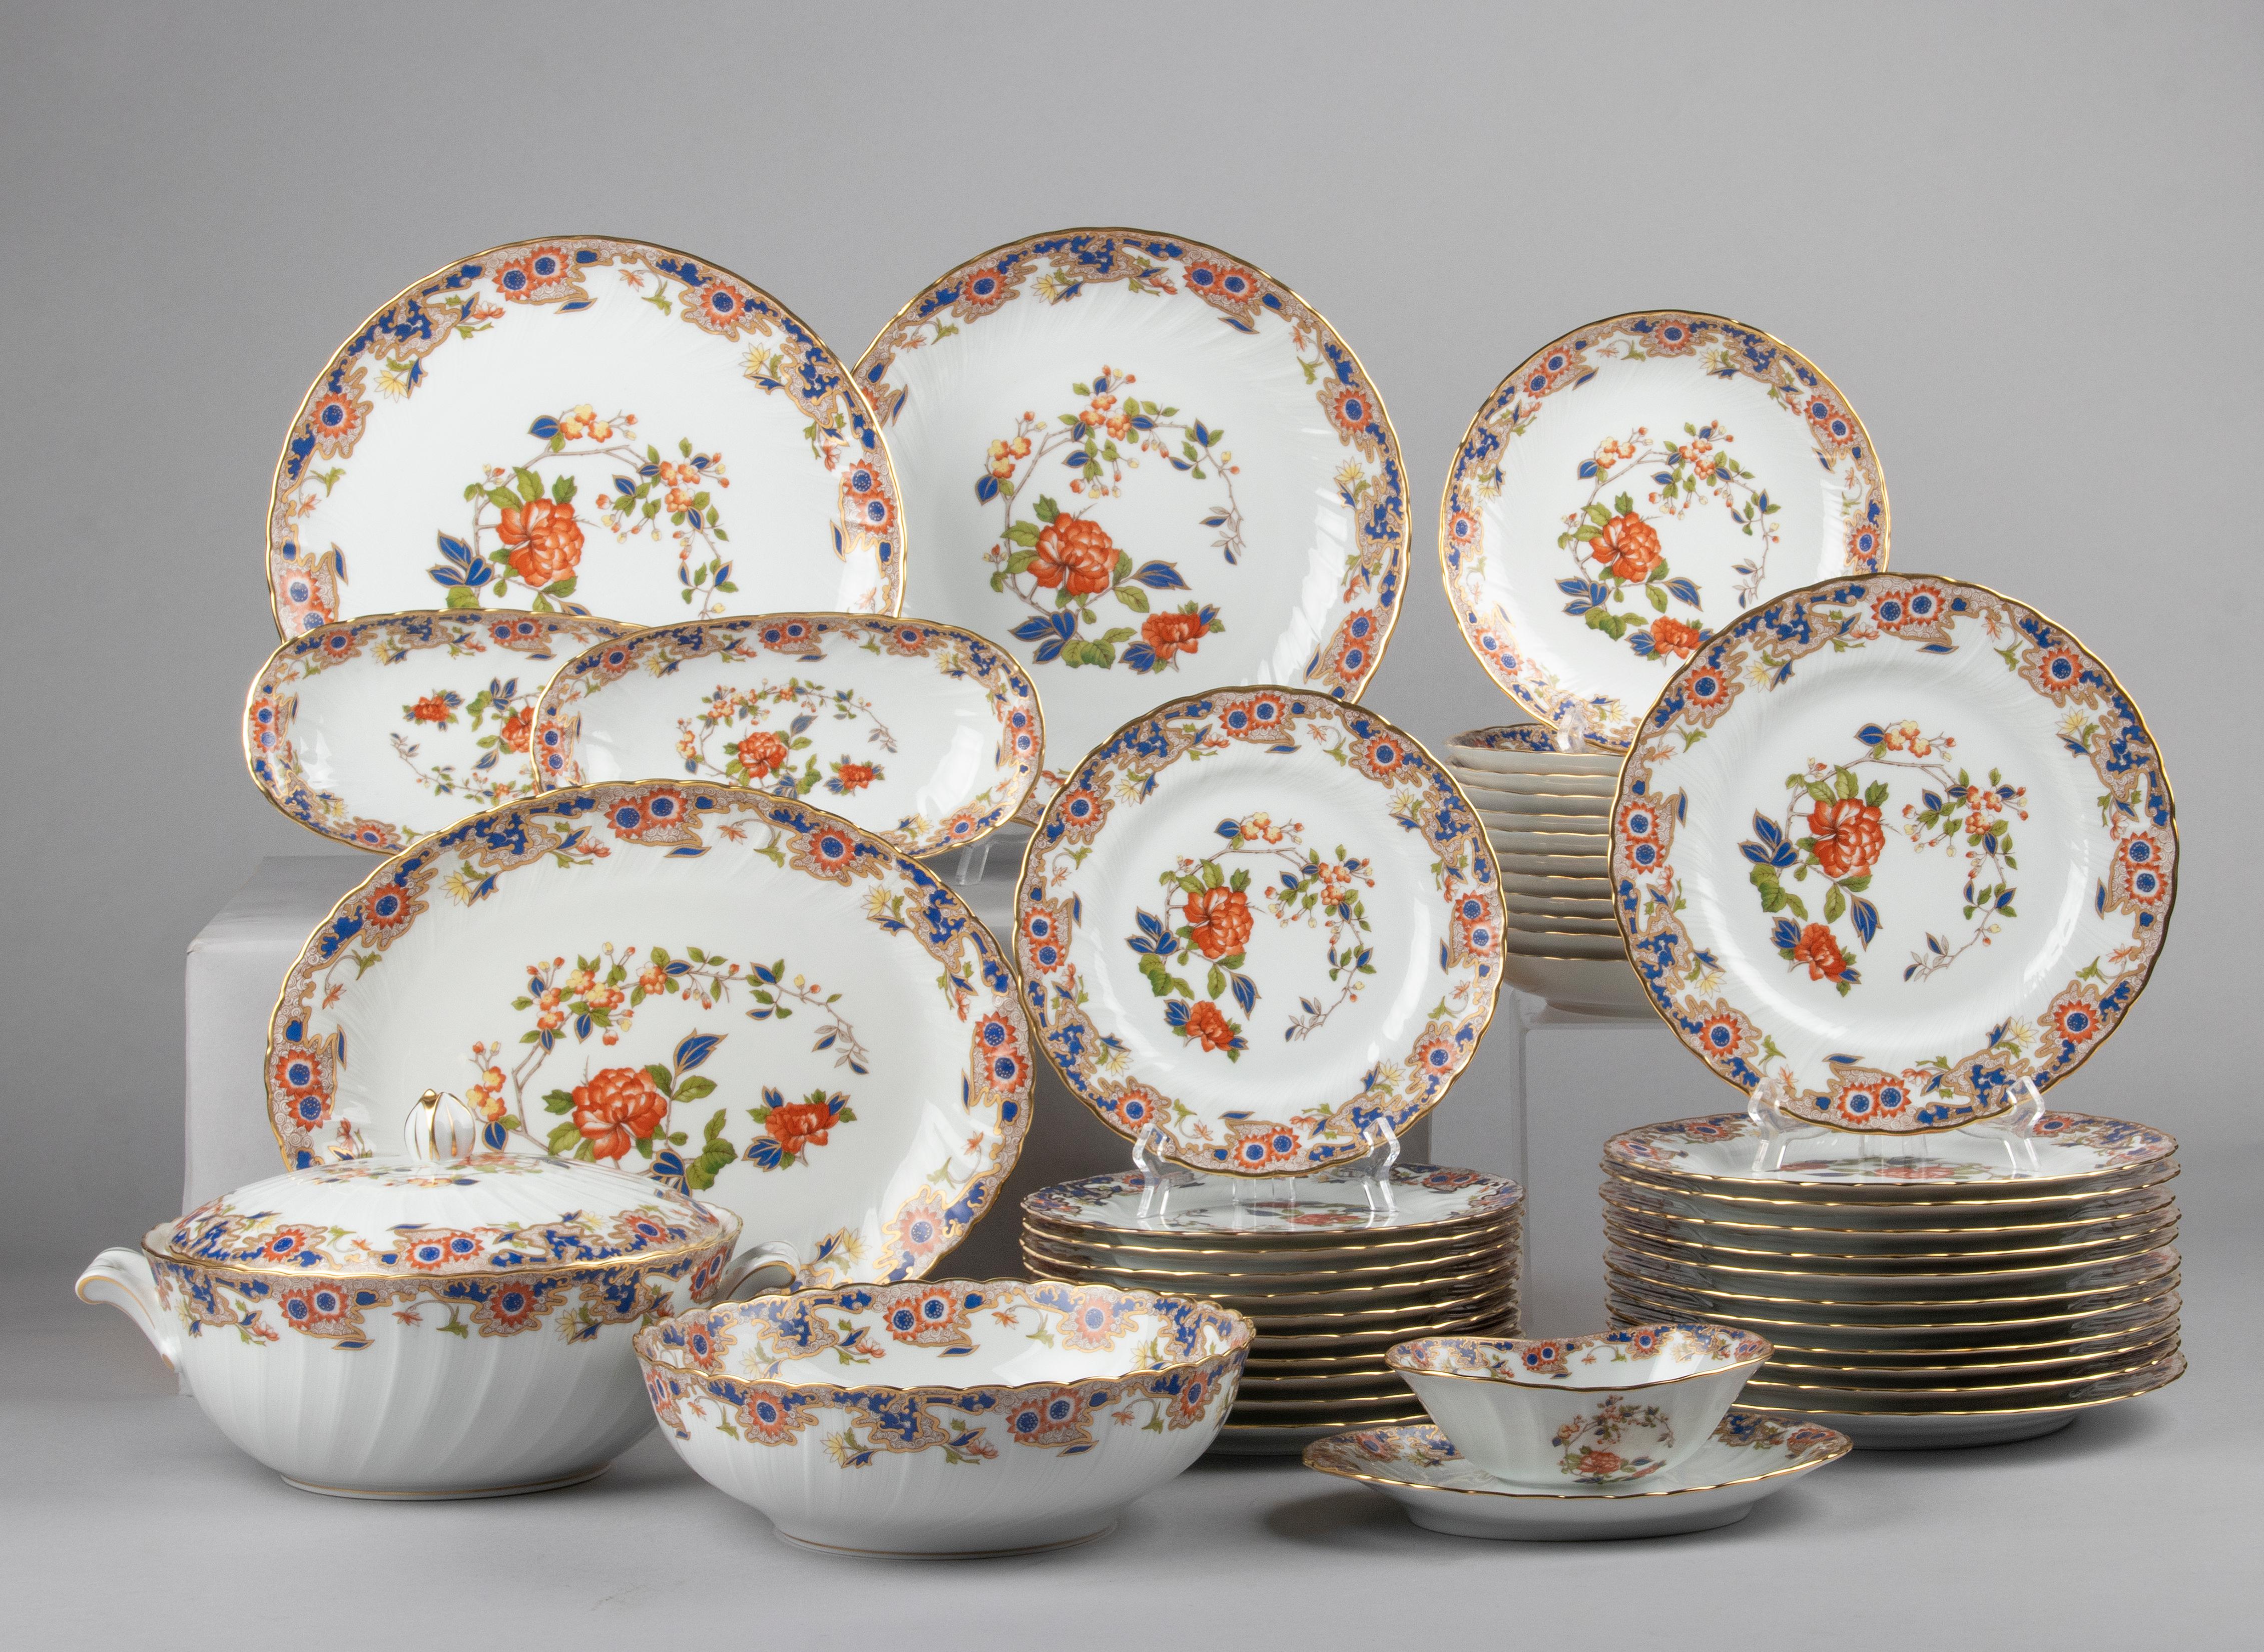 Lovely set of porcelain dinnerware made by Bernardaud Limoges. The name of the pattern is Singapour. This model was issued by Bernardaud from 1986 until 1998. The plates are very decorative with colorful flowers and gold rims. The quality of the